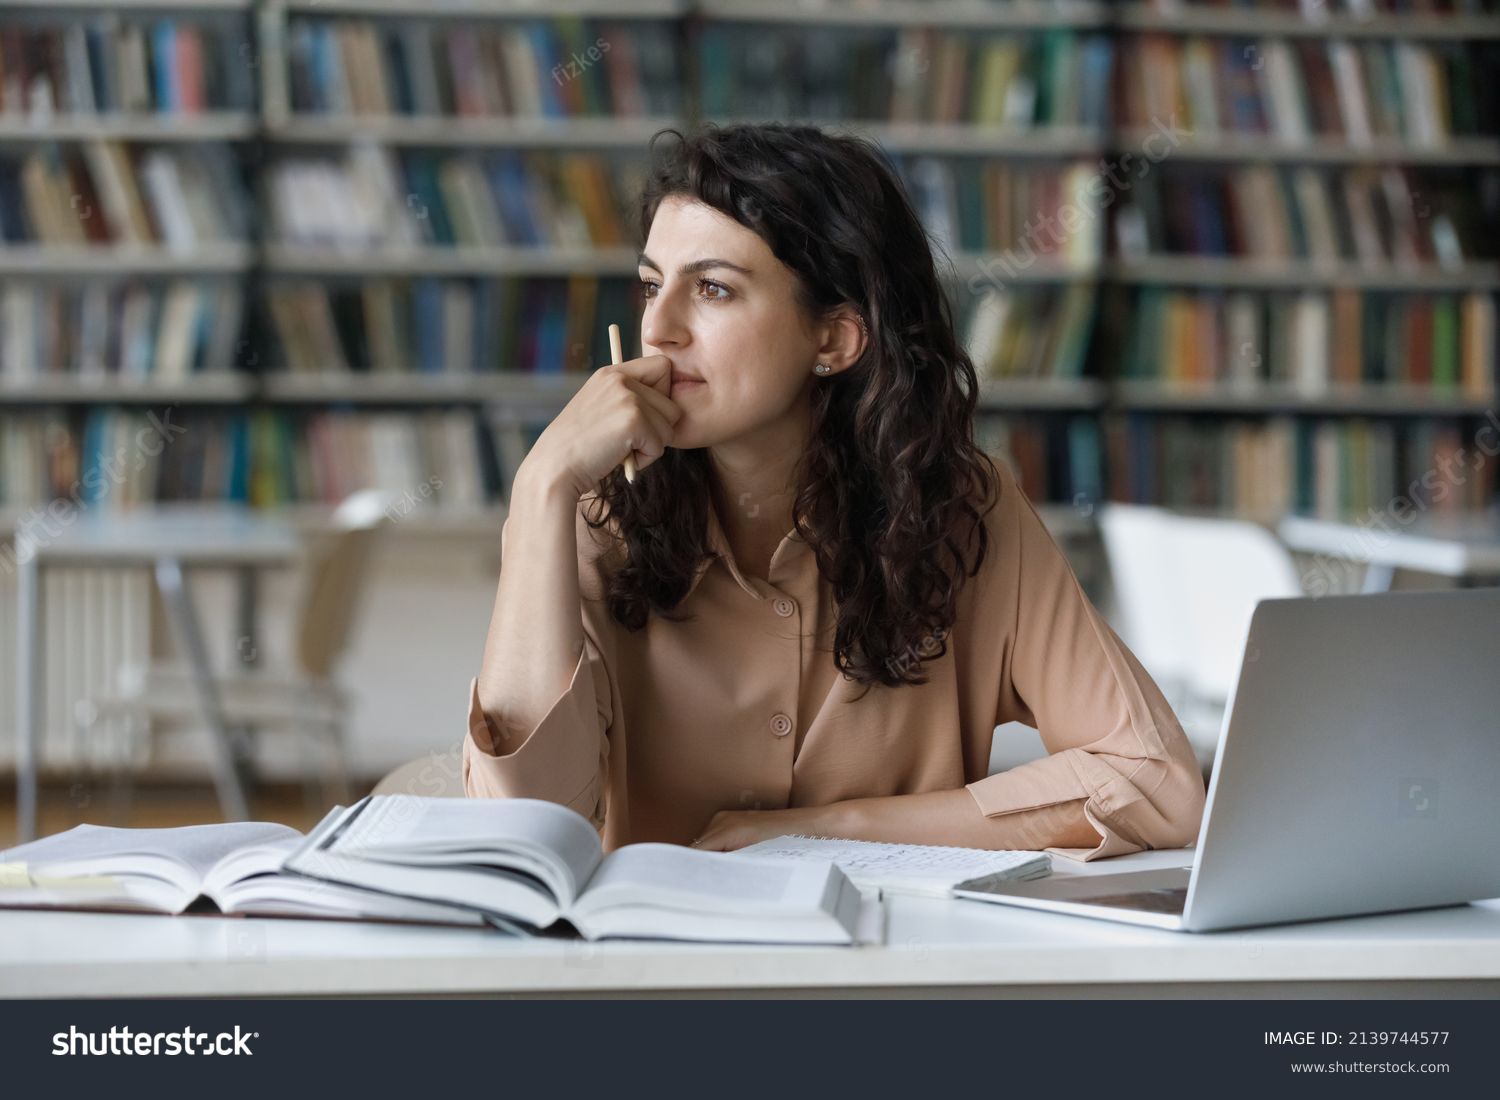 Young student girl sit at table with textbooks and laptop staring aside, studying alone in library, looks pensive and thoughtful search solution, prepare for exam, makes task feels confused or puzzled #2139744577